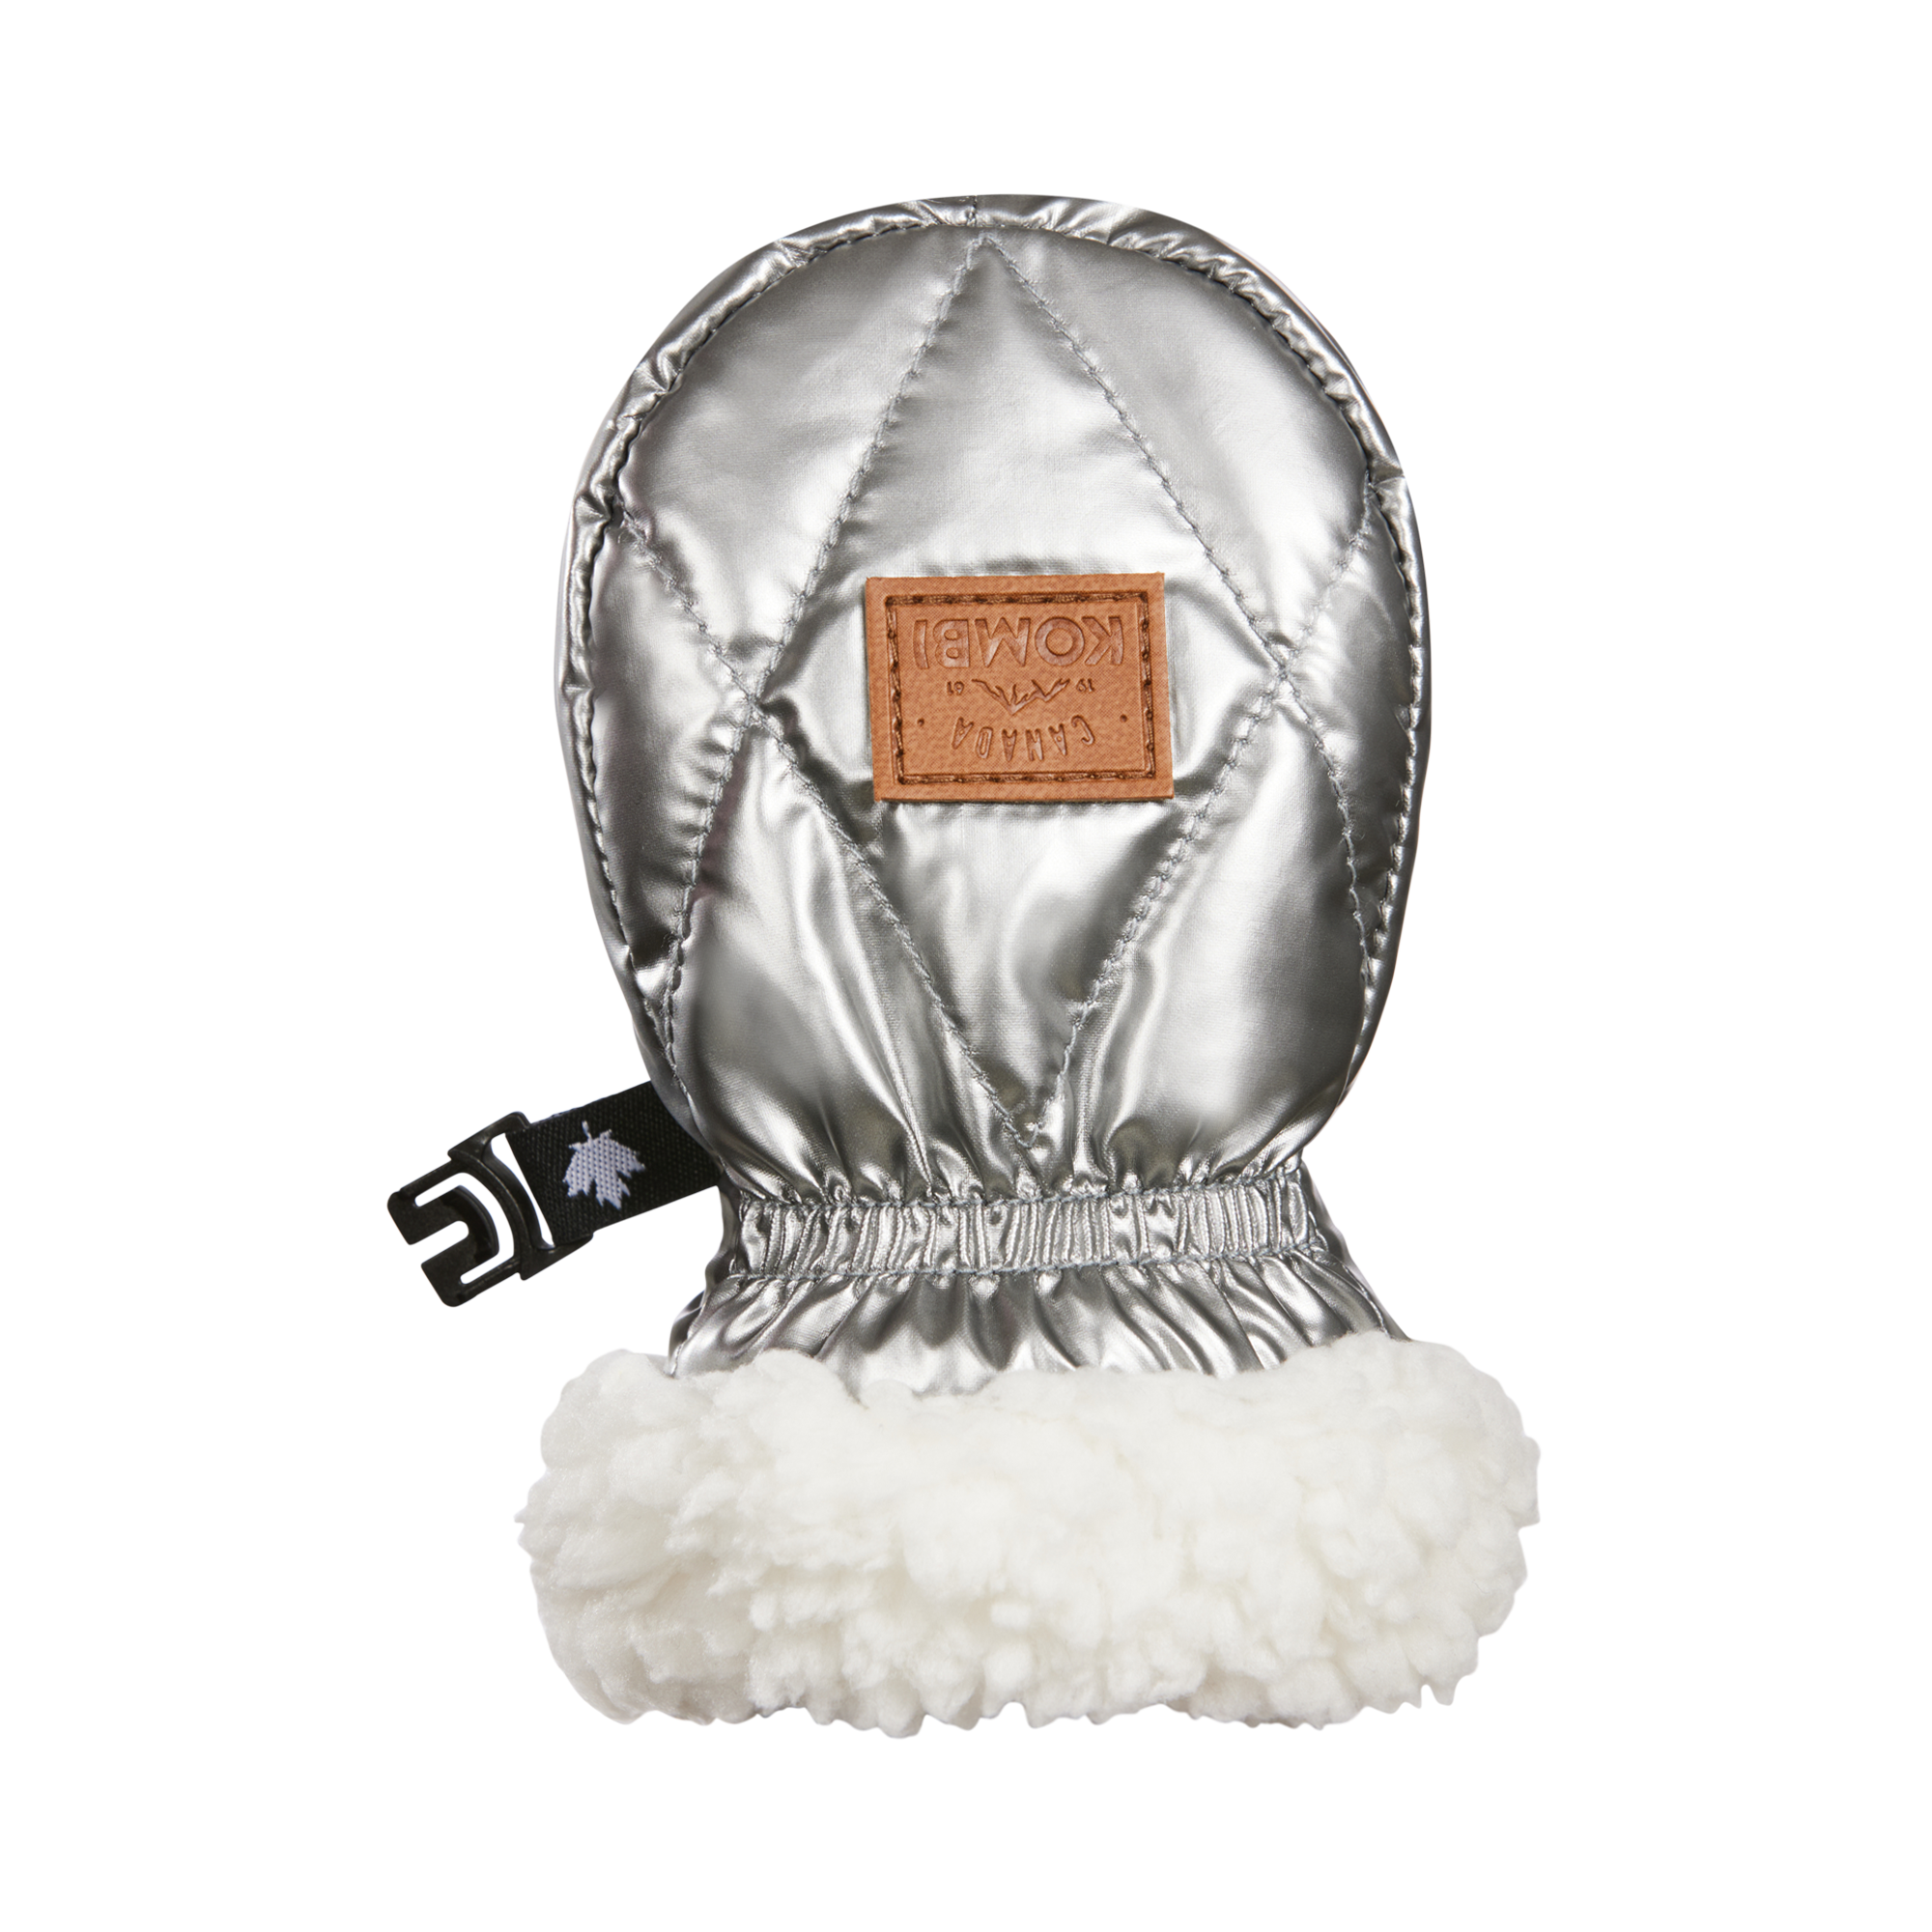 Back of Palm View - Silver Shadow Shiny Infant Mitt by Kombi